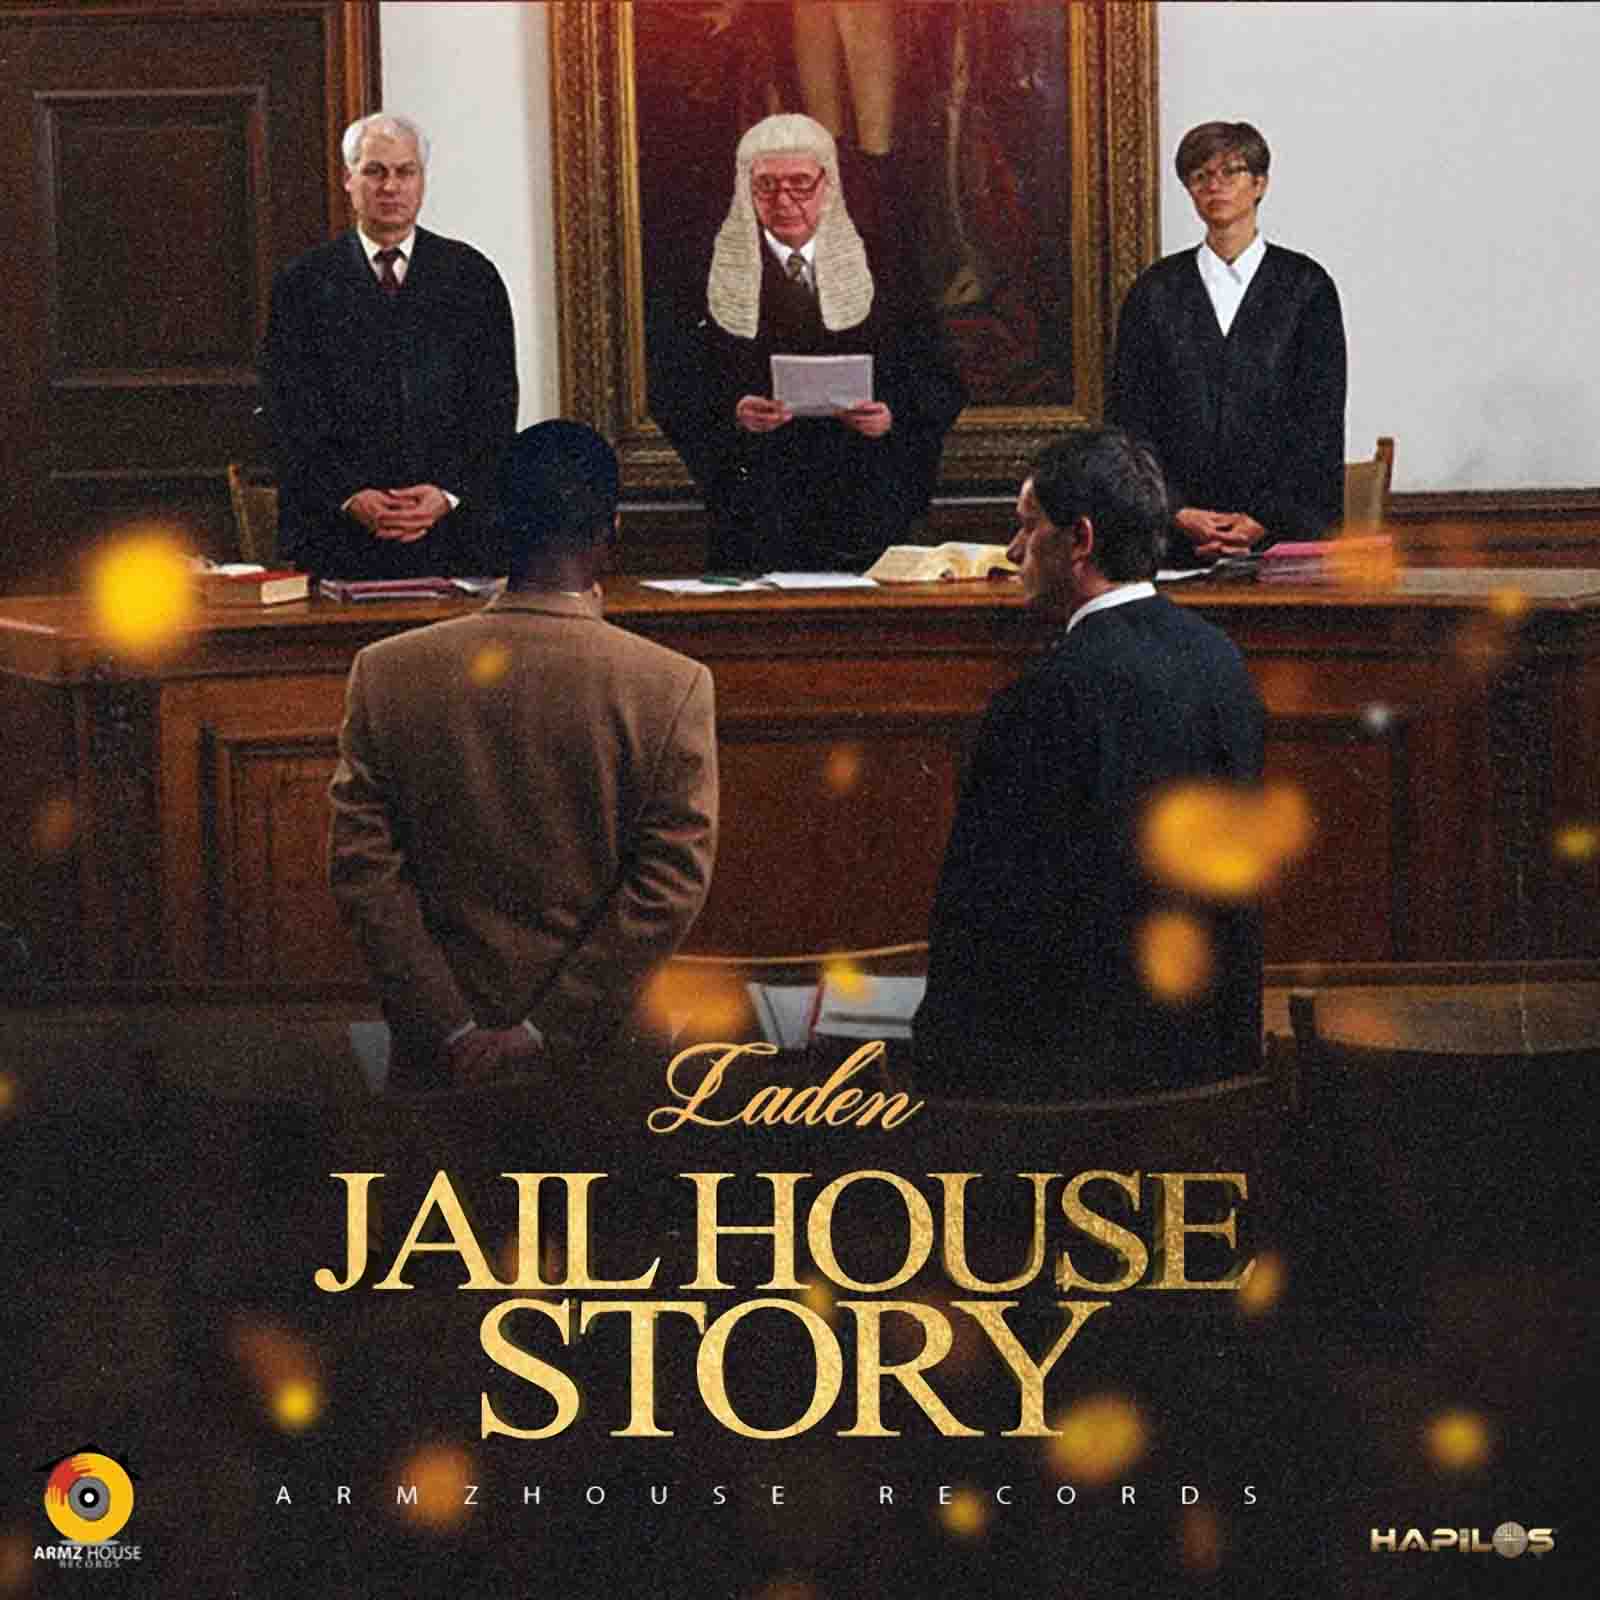 Laden - Jail House Story - Armzhouse Records